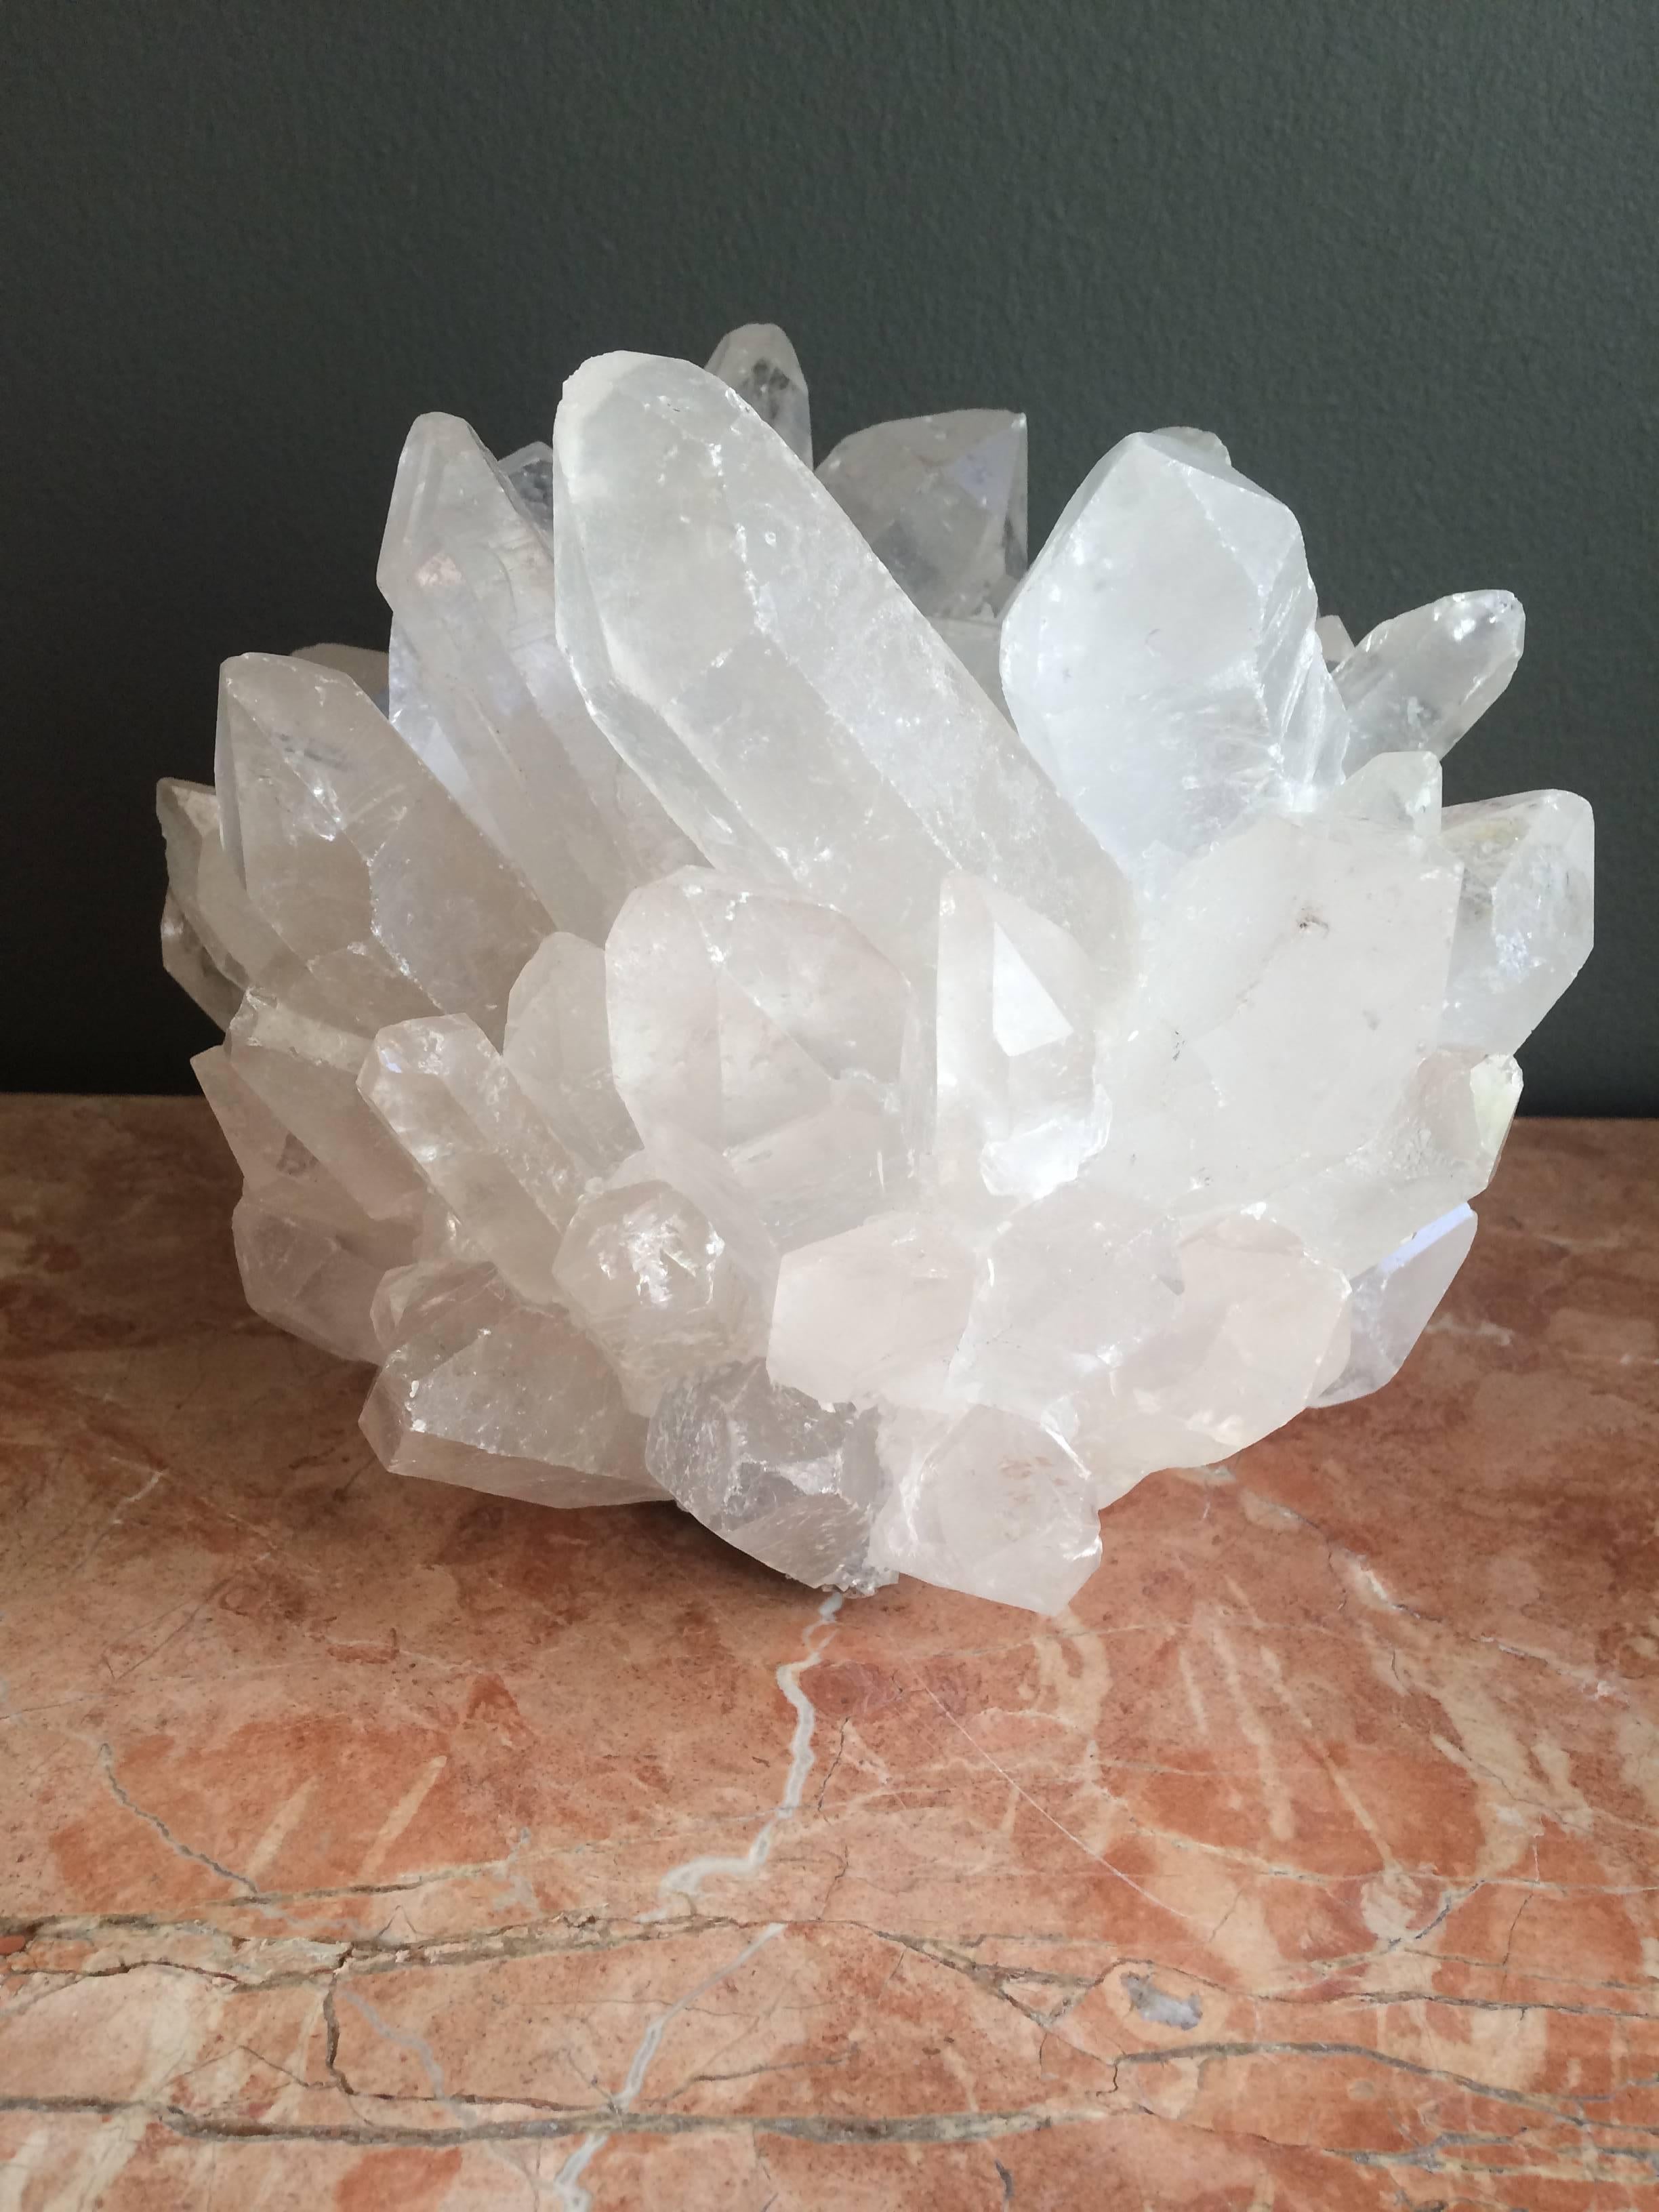 Exquisite rock crystal votive, made by hand.
No two are exactly alike.